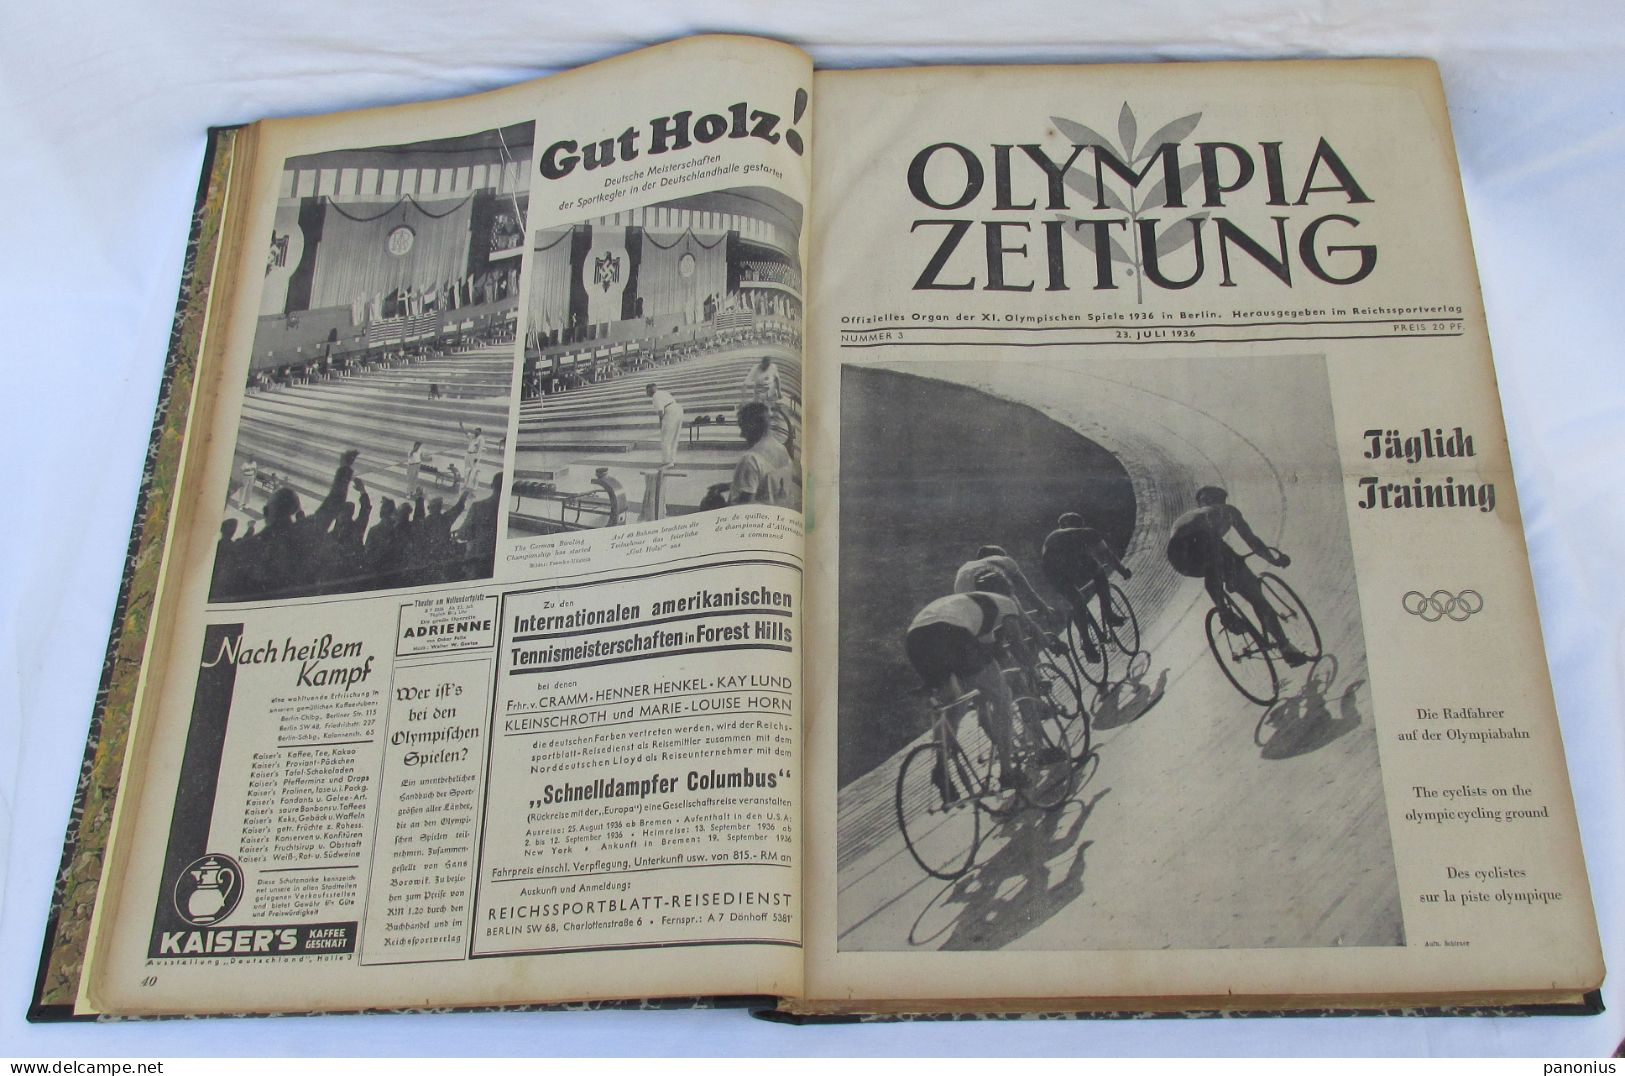 OLYMPIA ZEITUNG NEWSPAPER OLYMPIC GAMES BERLIN GERMANY 1936 SET 30 NUMBERS!!! - Kleding, Souvenirs & Andere